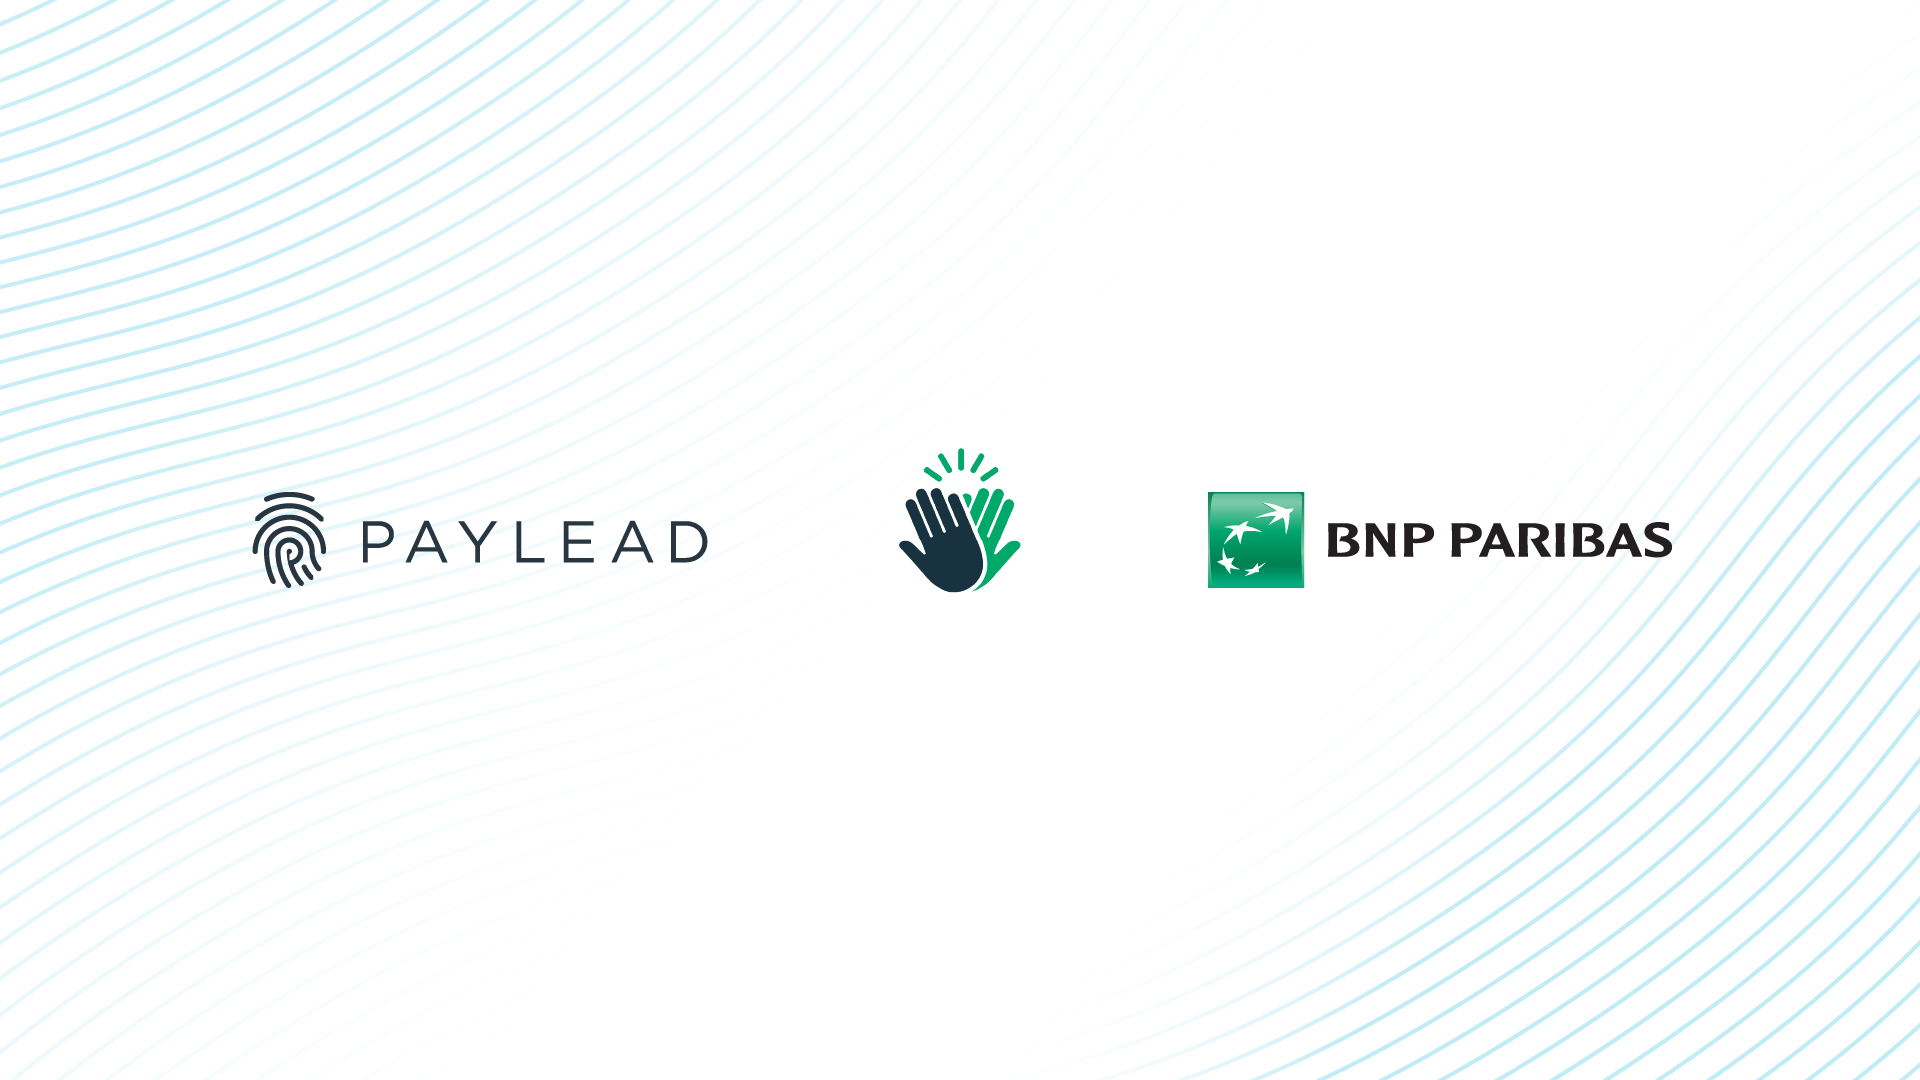 ​​BNP Paribas launches their rewards program with Paylead.